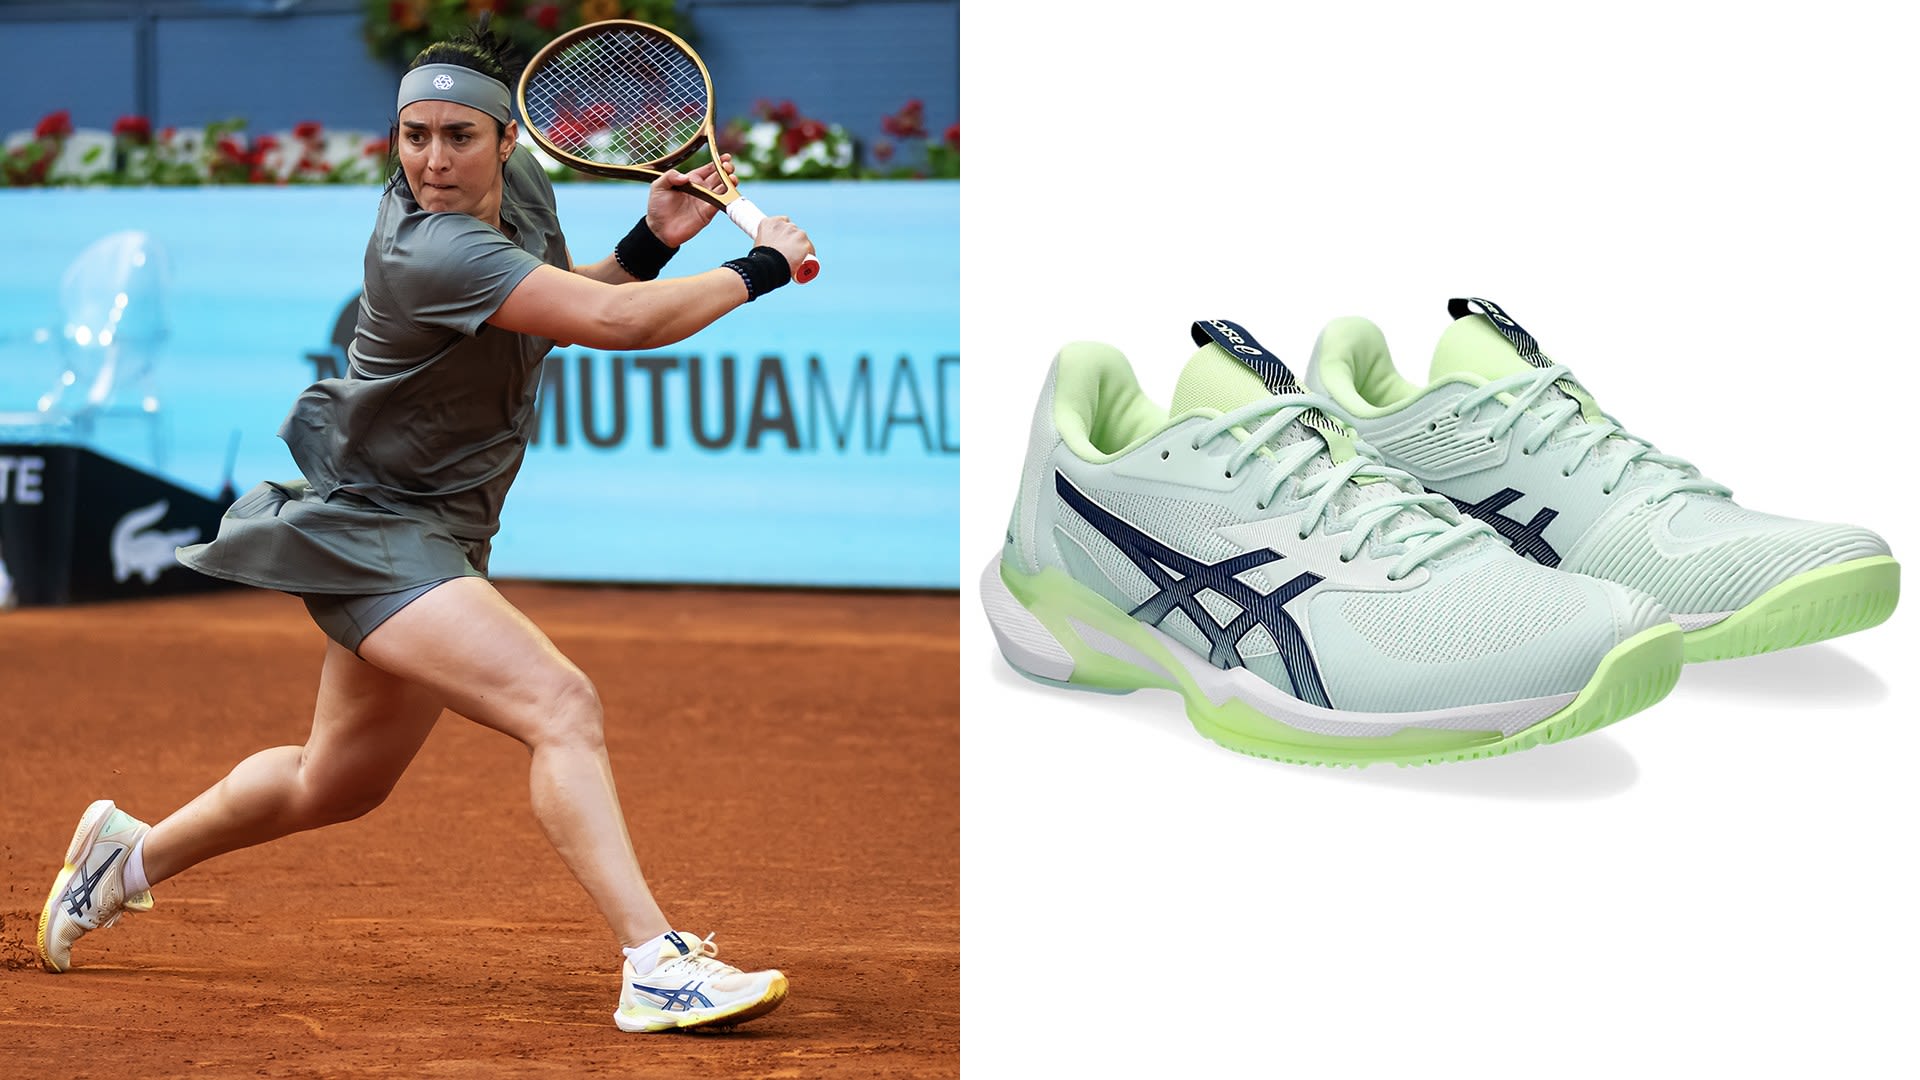 Ons Jabeur steps up her tennis shoe game with new ASICS contract | Tennis.com